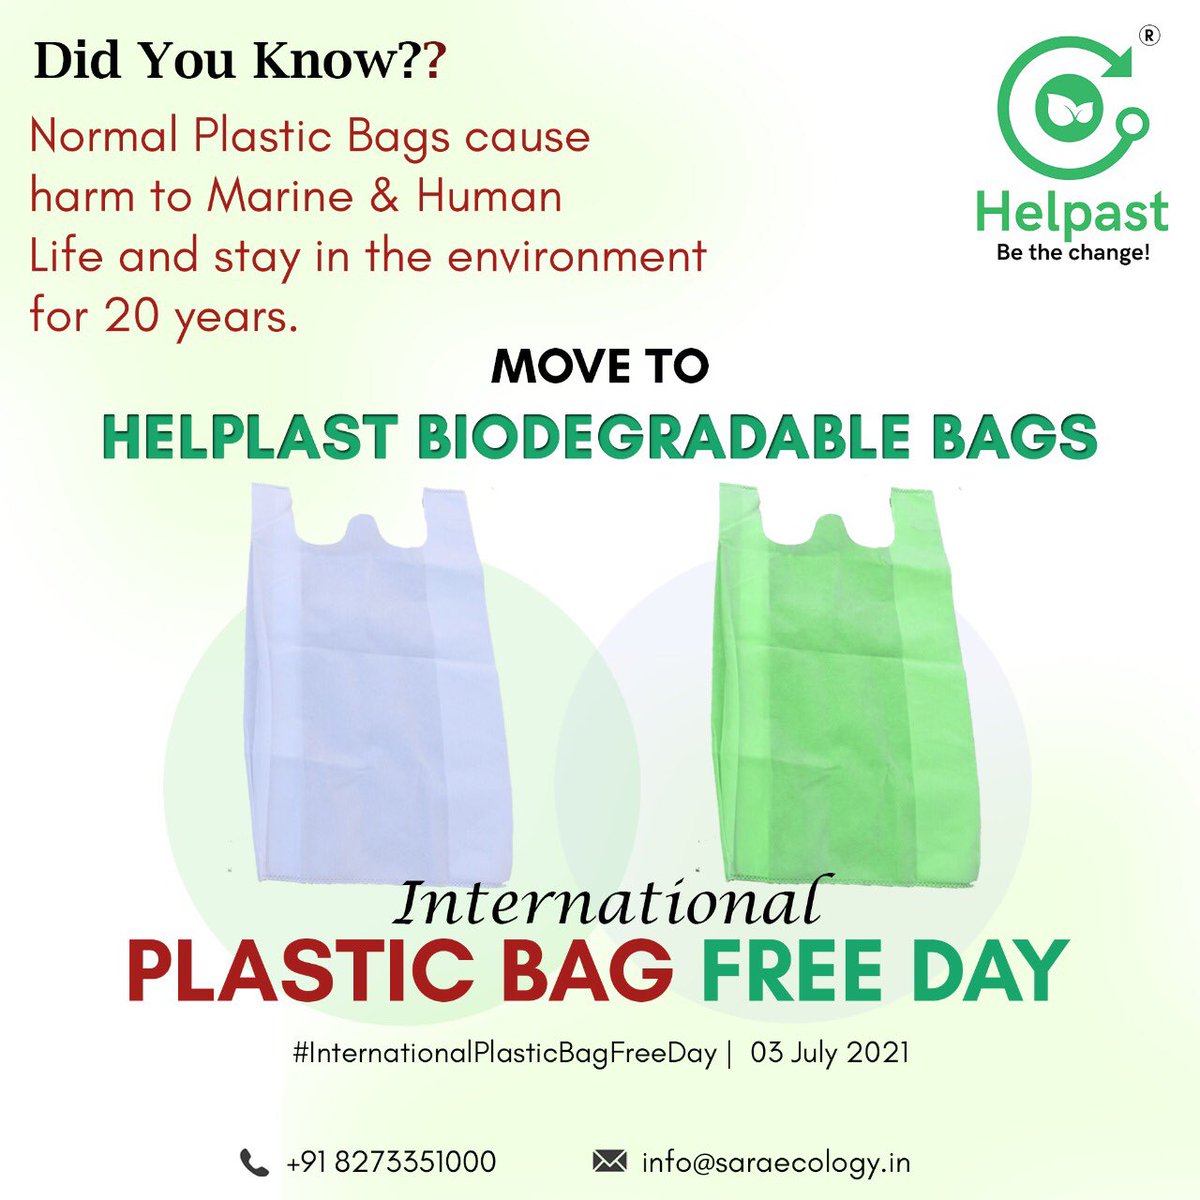 India's first Patented & Certified Packaging 
Connect with us for Biodegradable/Compostable packaging solutions. 

#saynotoplastic  #plasticfreeindia 
#NoPlasticCarryBags #packaging #sustainability #circulareconomy #environment #ecofriendly #innovation # #recycling